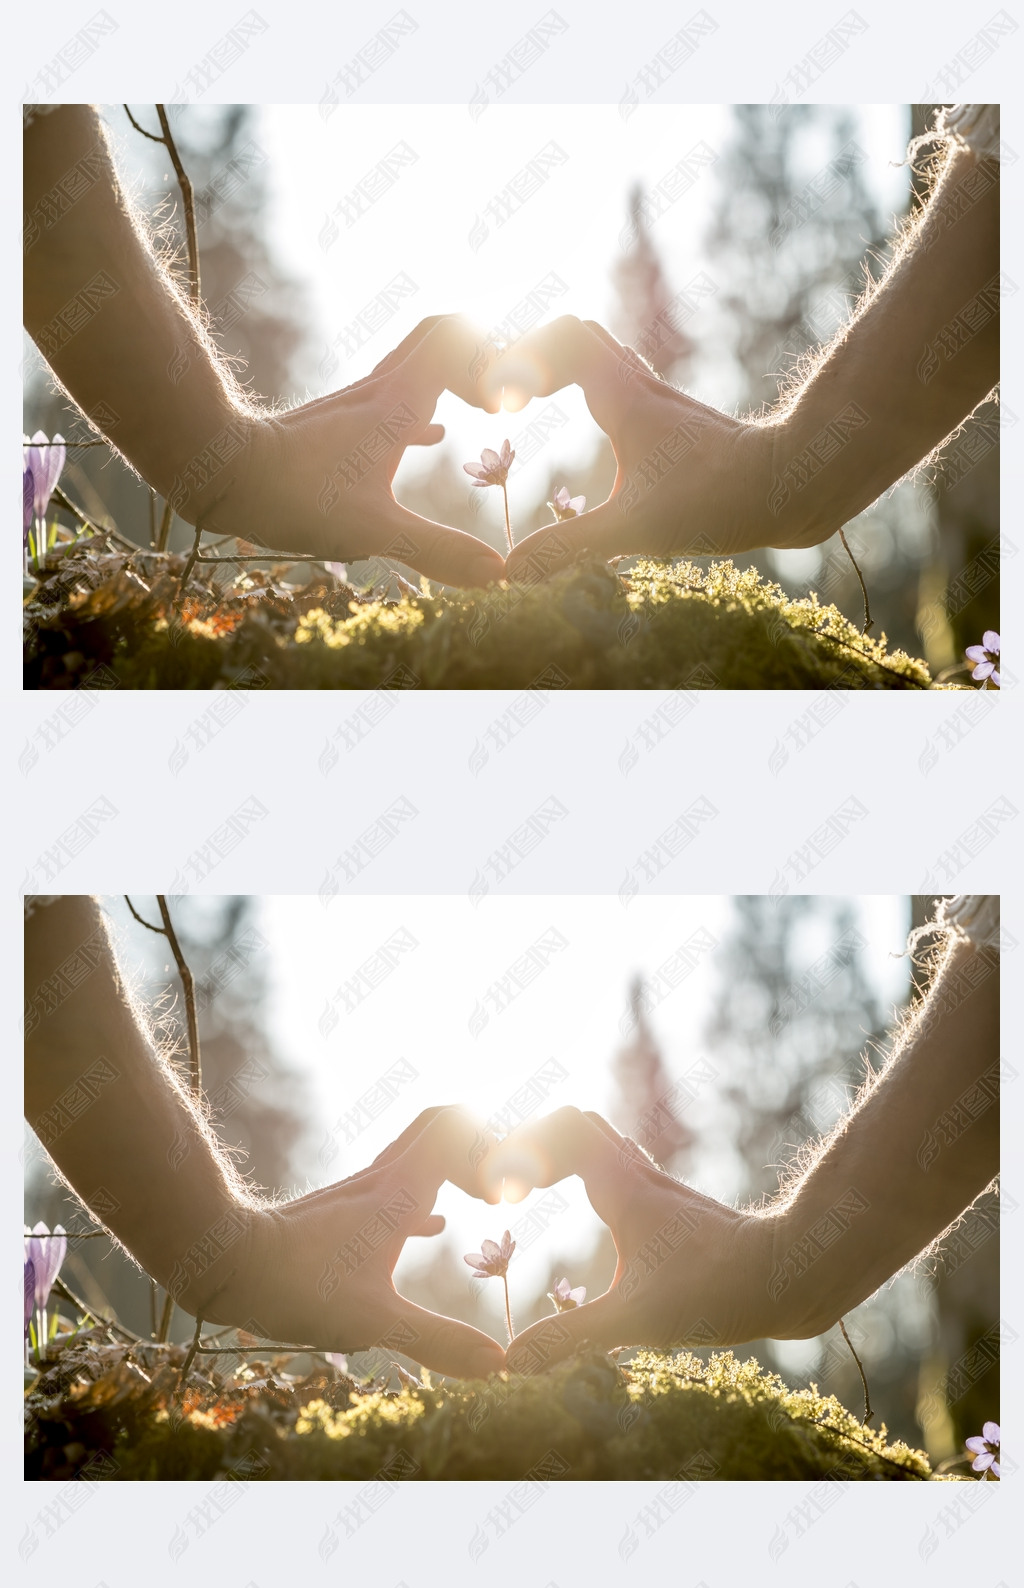 Hands Forming Heart Shape Around Small Flower